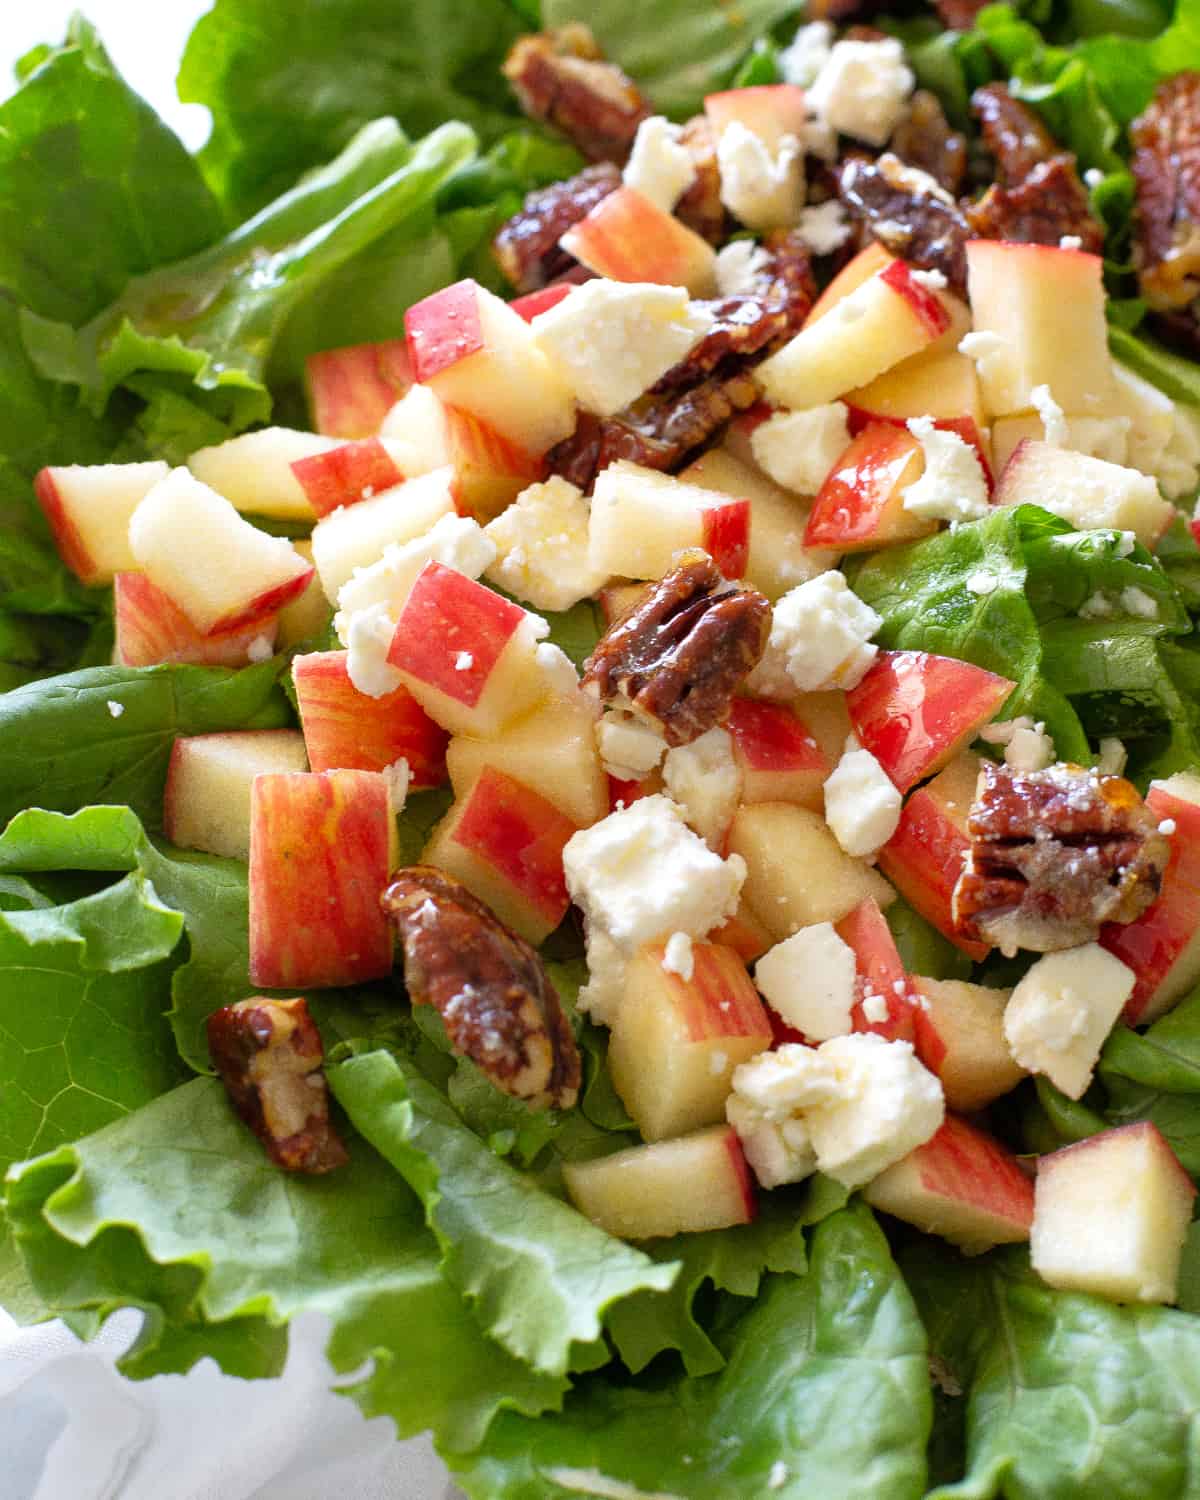 Pecan and Apple Salad is my go-to salad for potlucks. Candied pecans, fresh apples, and cheese make this salad unique and full of flavor! #apple #pecan #salad